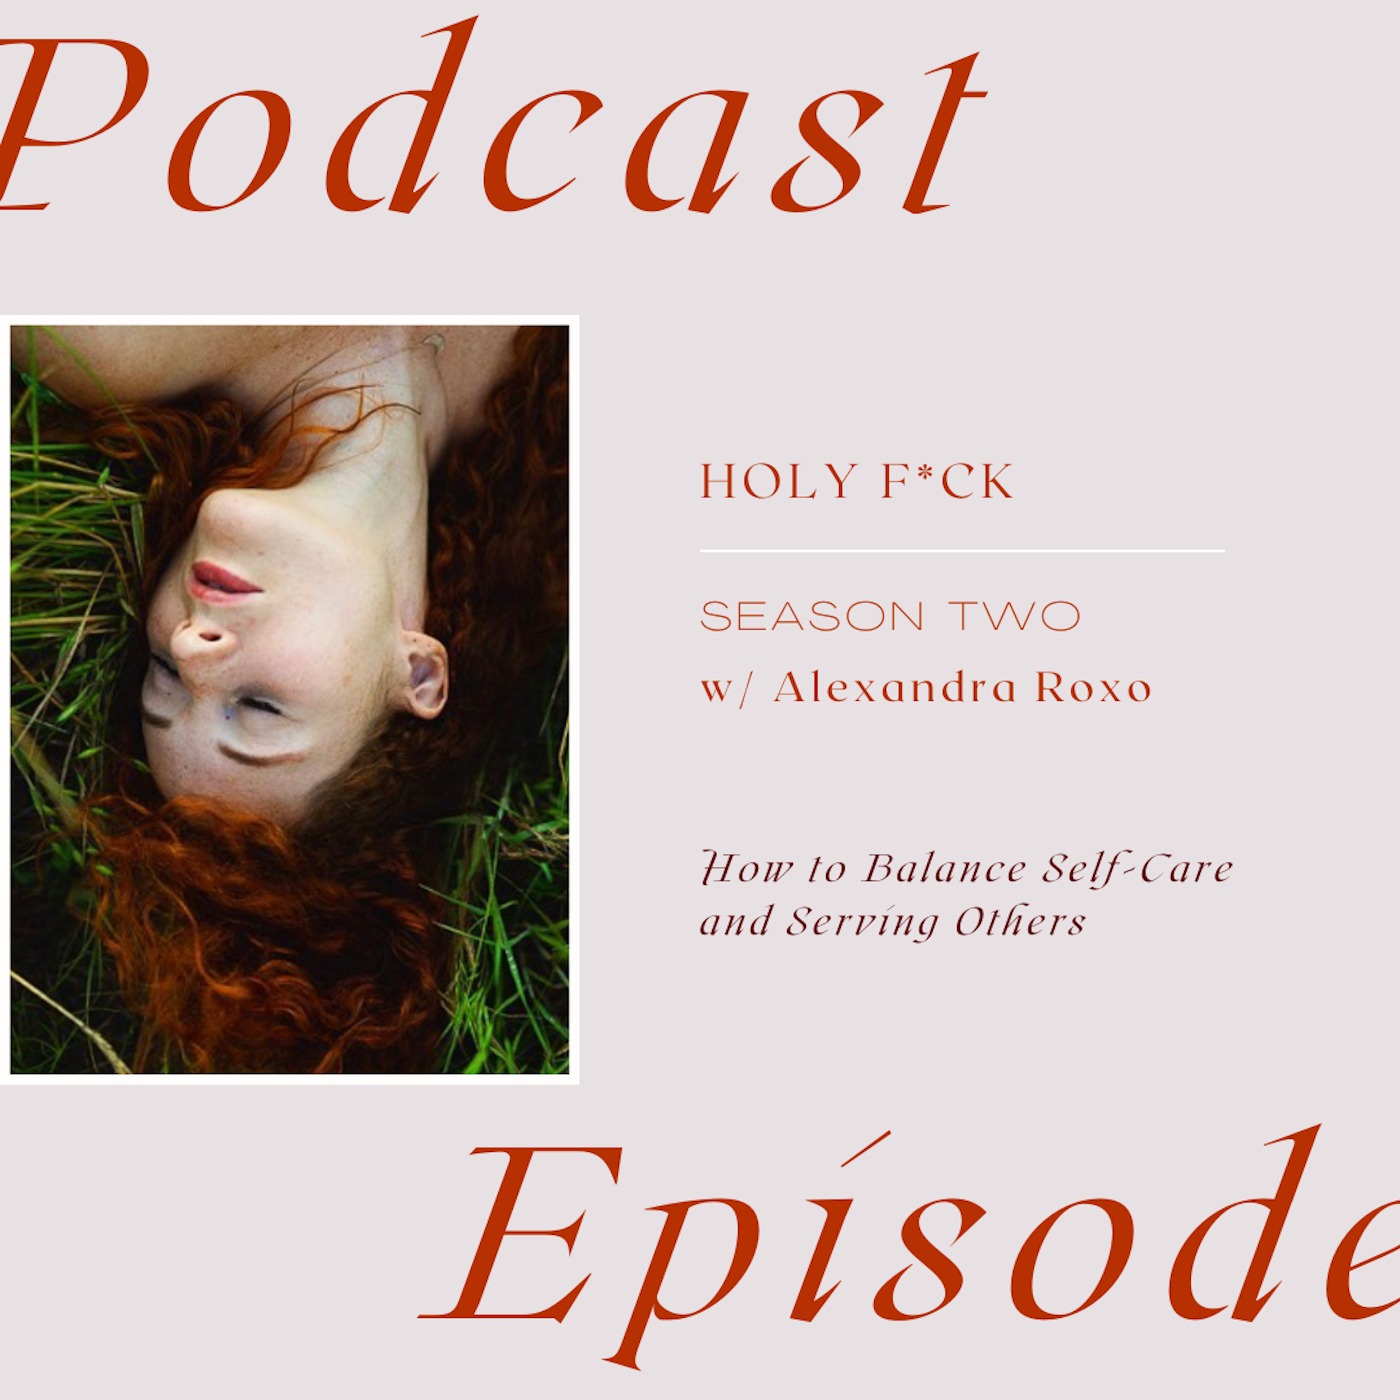 How to Balance Self-Care and Serving Others with Alexandra Roxo